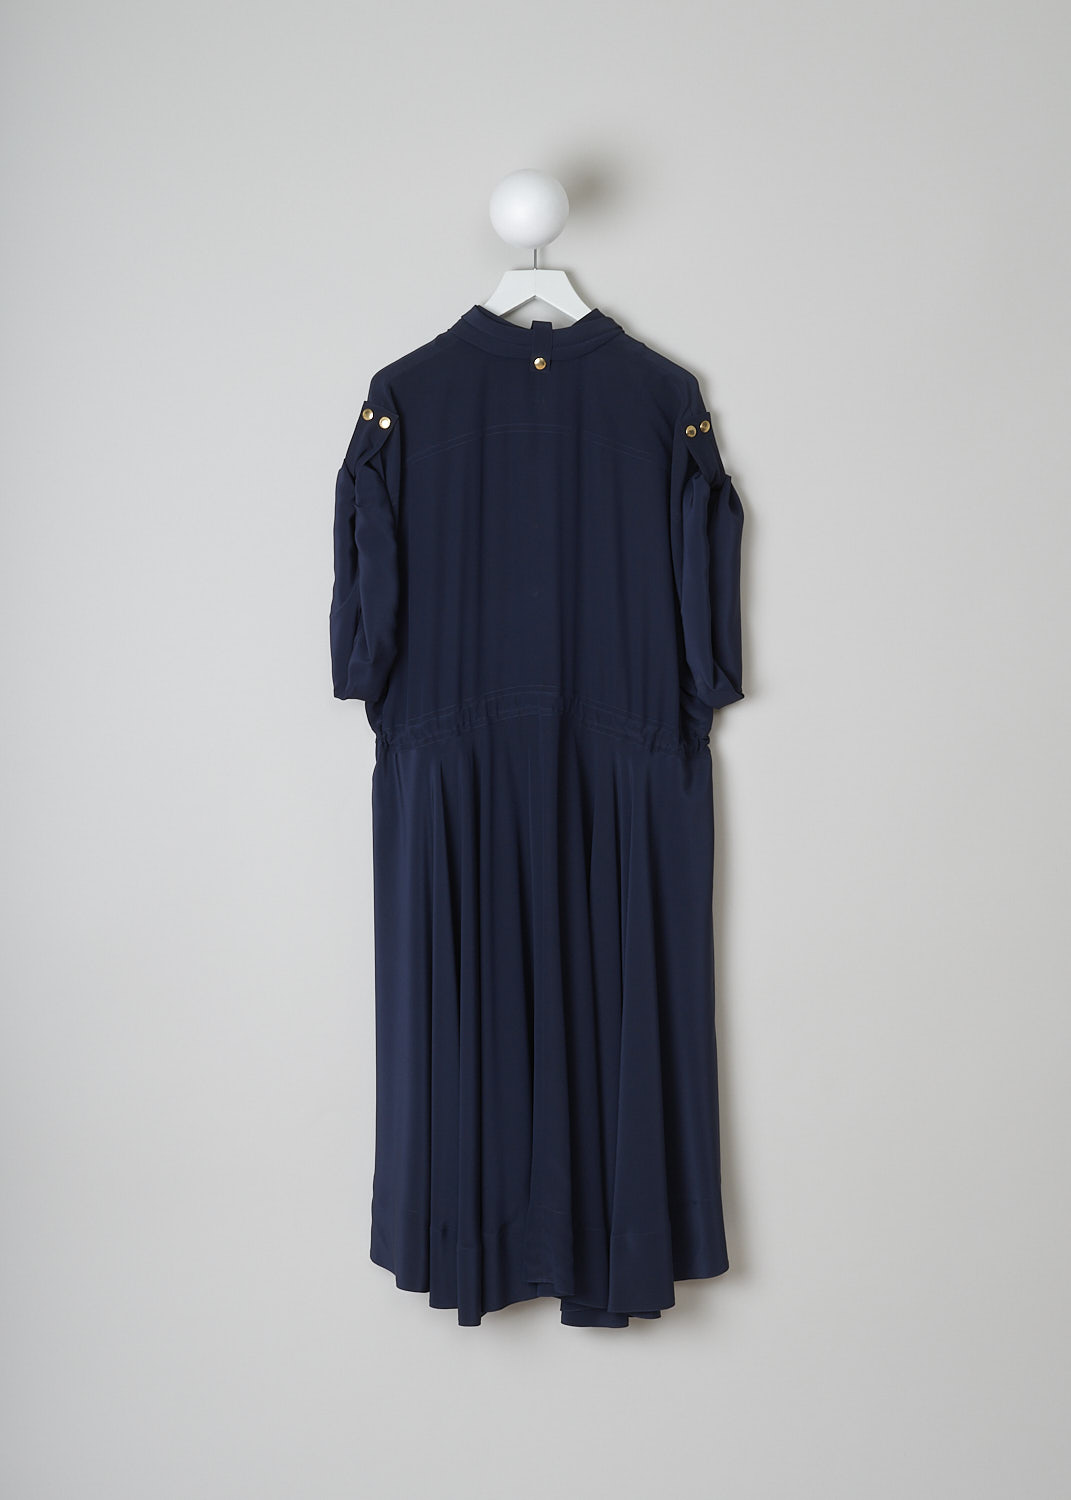 CHLOÃ‰, INK NAVY DRESS WITH GOLD-TONE BUTTONS, CHC19SRO510044C3_INK_NAVY, Blue, Back, This Ink navy silk maxi dress has gold-tone snap buttons throughout. The dress has a gathered collar with snap buttons and a front snap button closure. The wide long sleeves can be rolled up with snap buttons. On the front, the dress has two buttoned patch pockets and slanted pockets. A drawstring can be used to cinch in the waist. The dress has an asymmetric hemline.    
